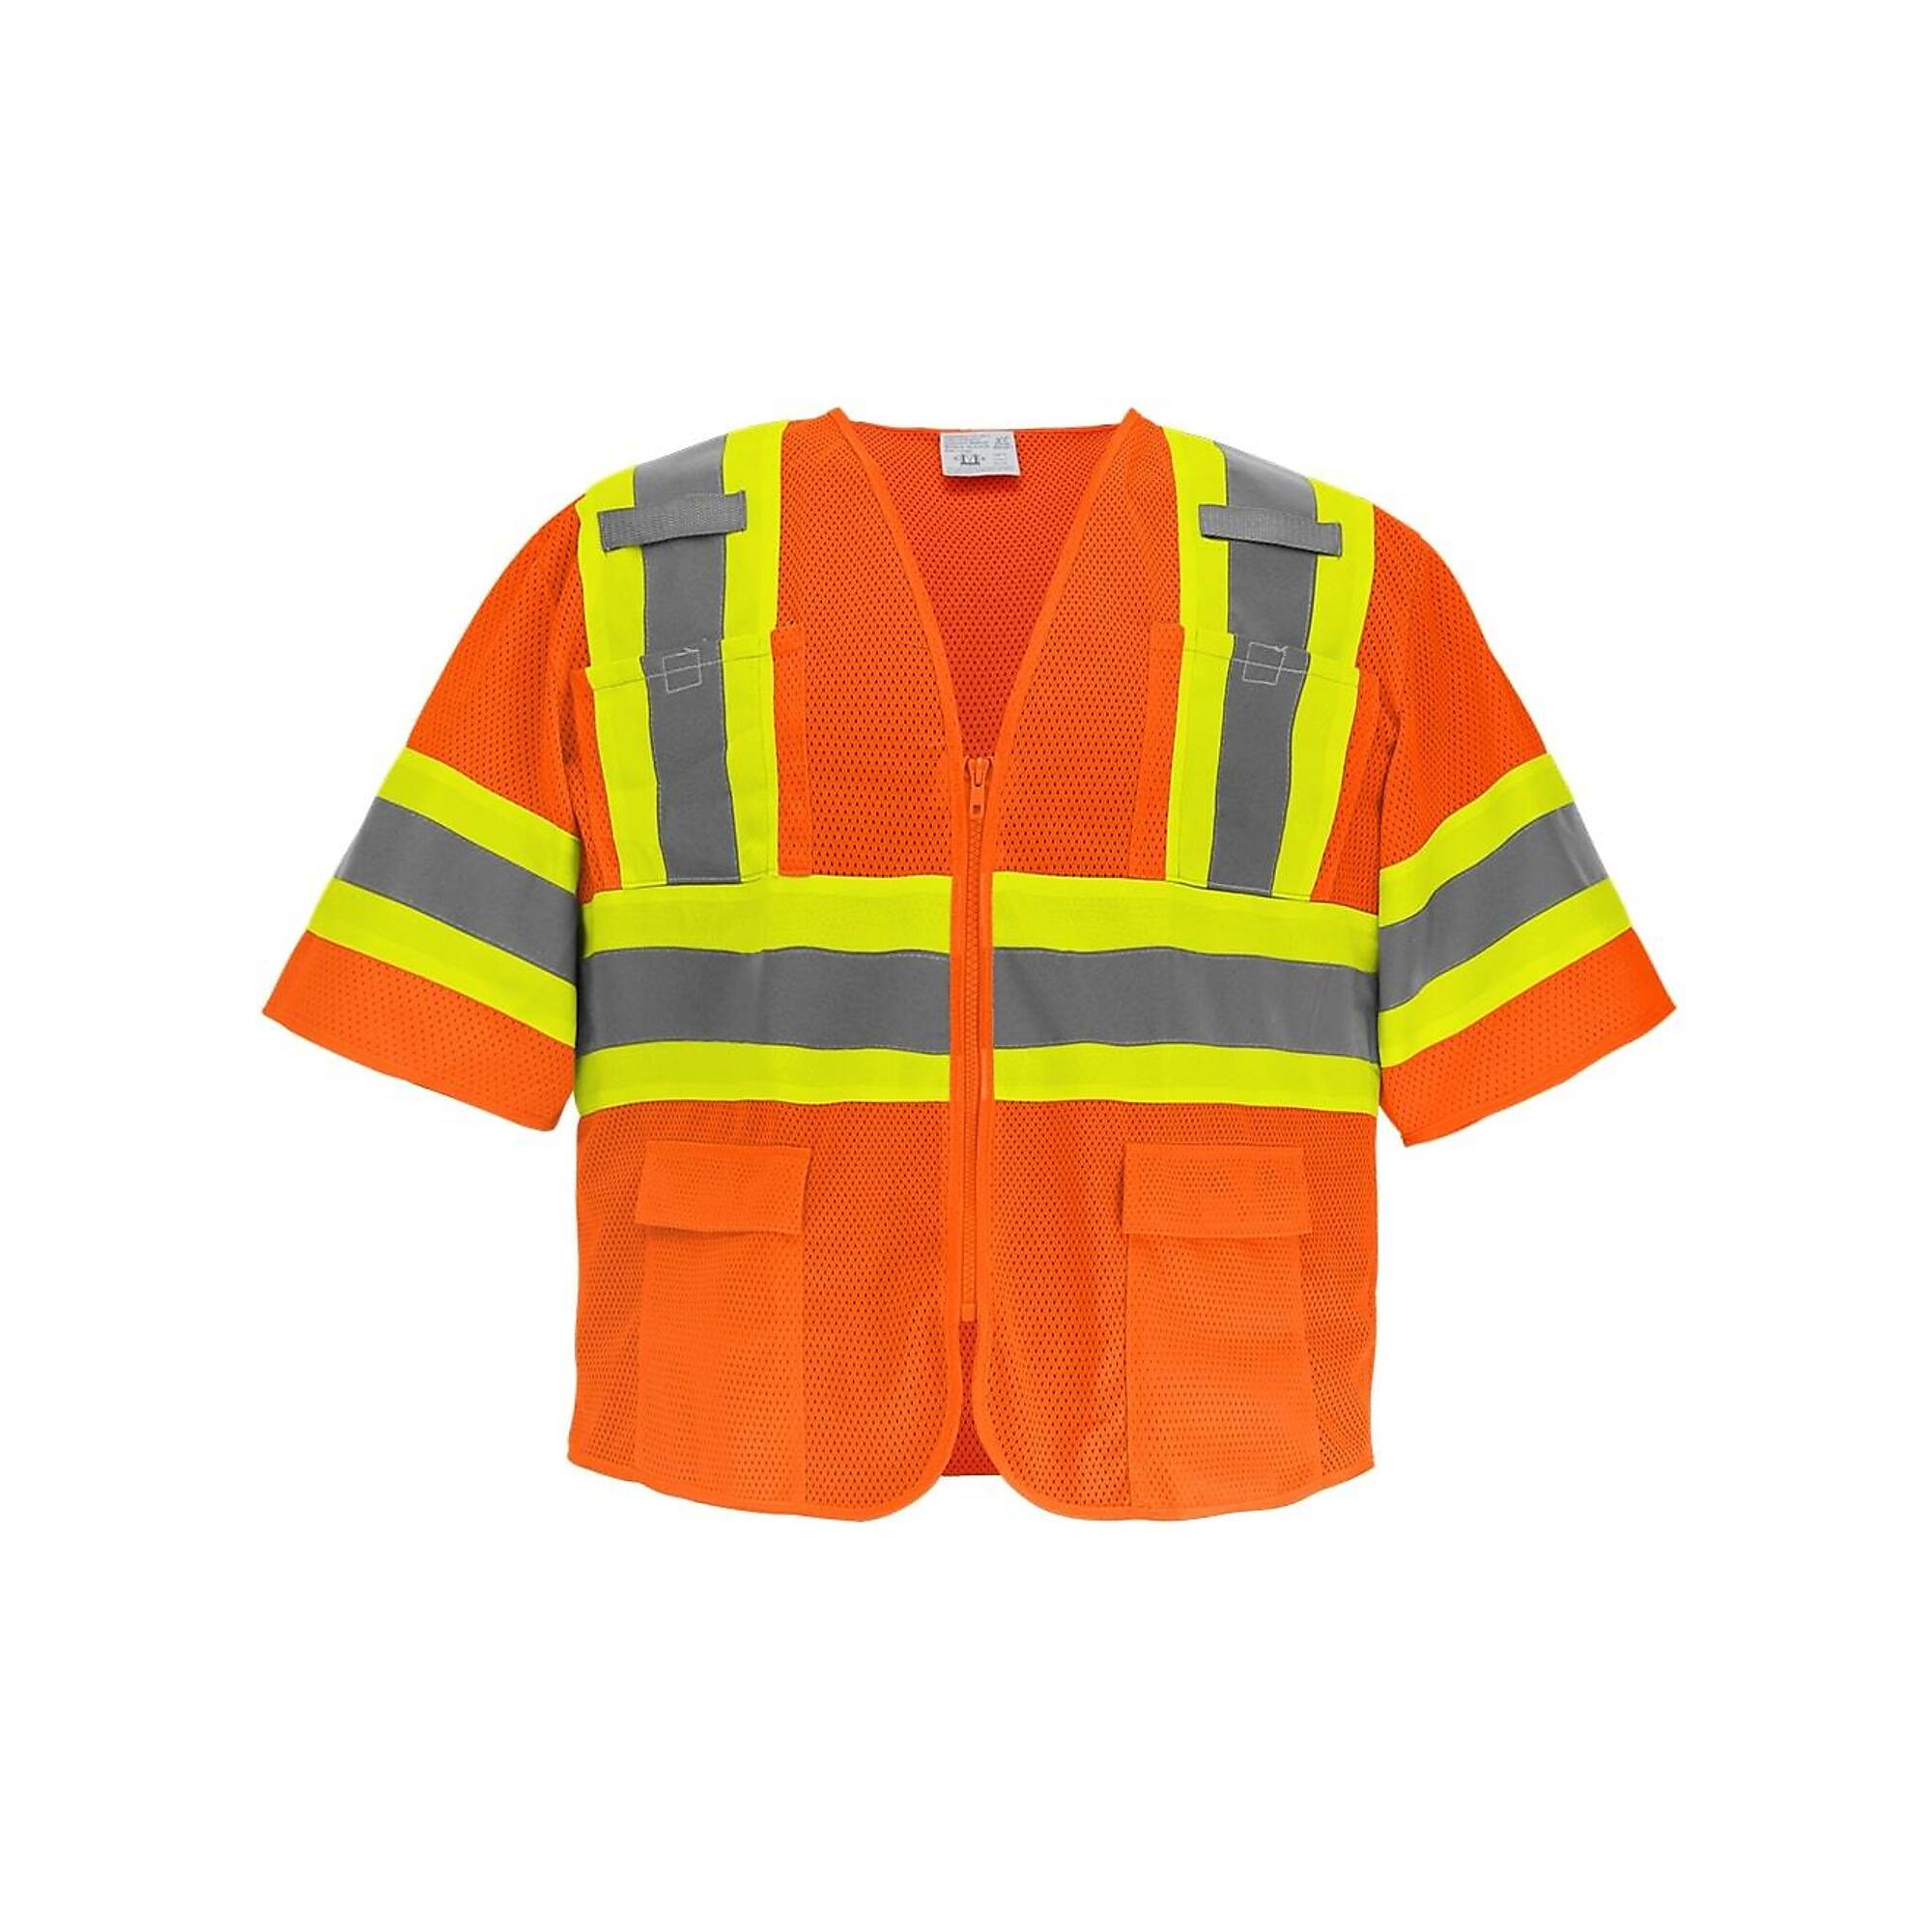 FrogWear, HV Orange, Class 3 6 Pockets, With Sleeves Mesh Vest, Size 4XL, Color High-Visibility Orange, Model GLO-0145-4XL